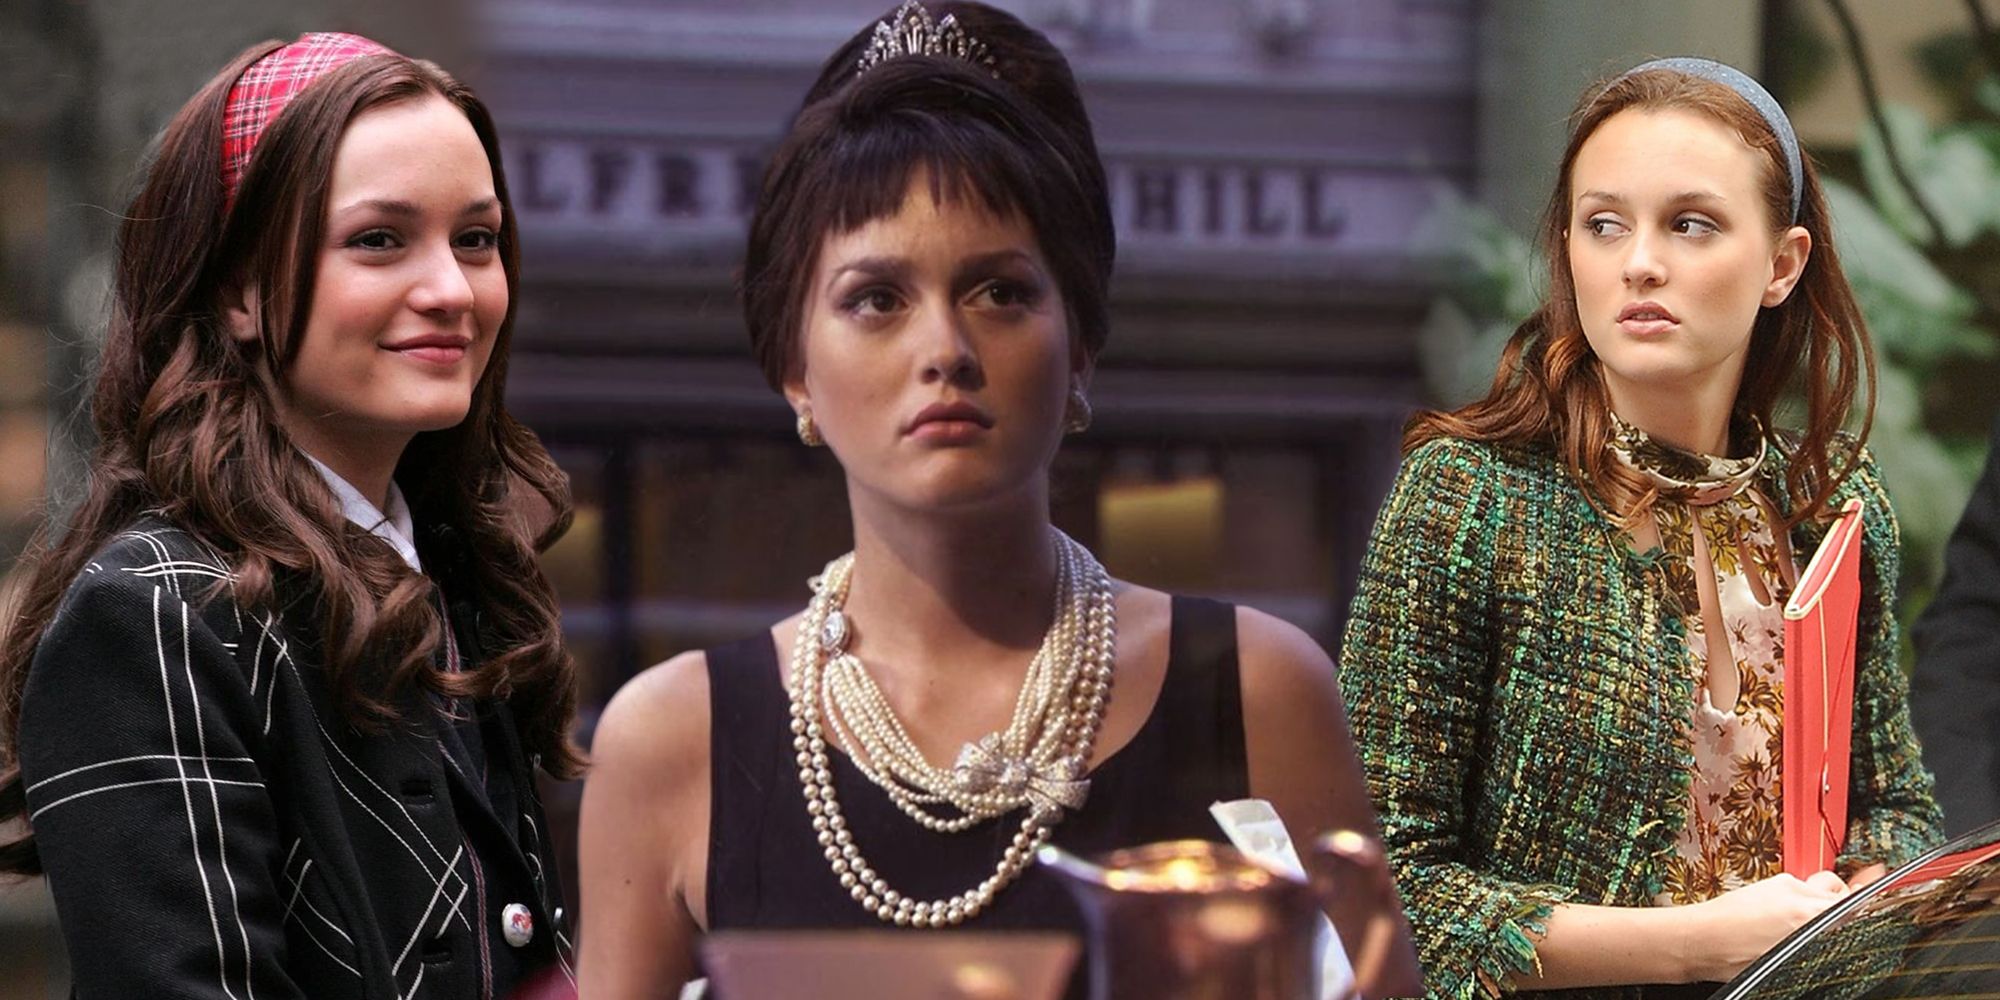 How to Copy Blair Waldorf's Iconic Style From Gossip Girl